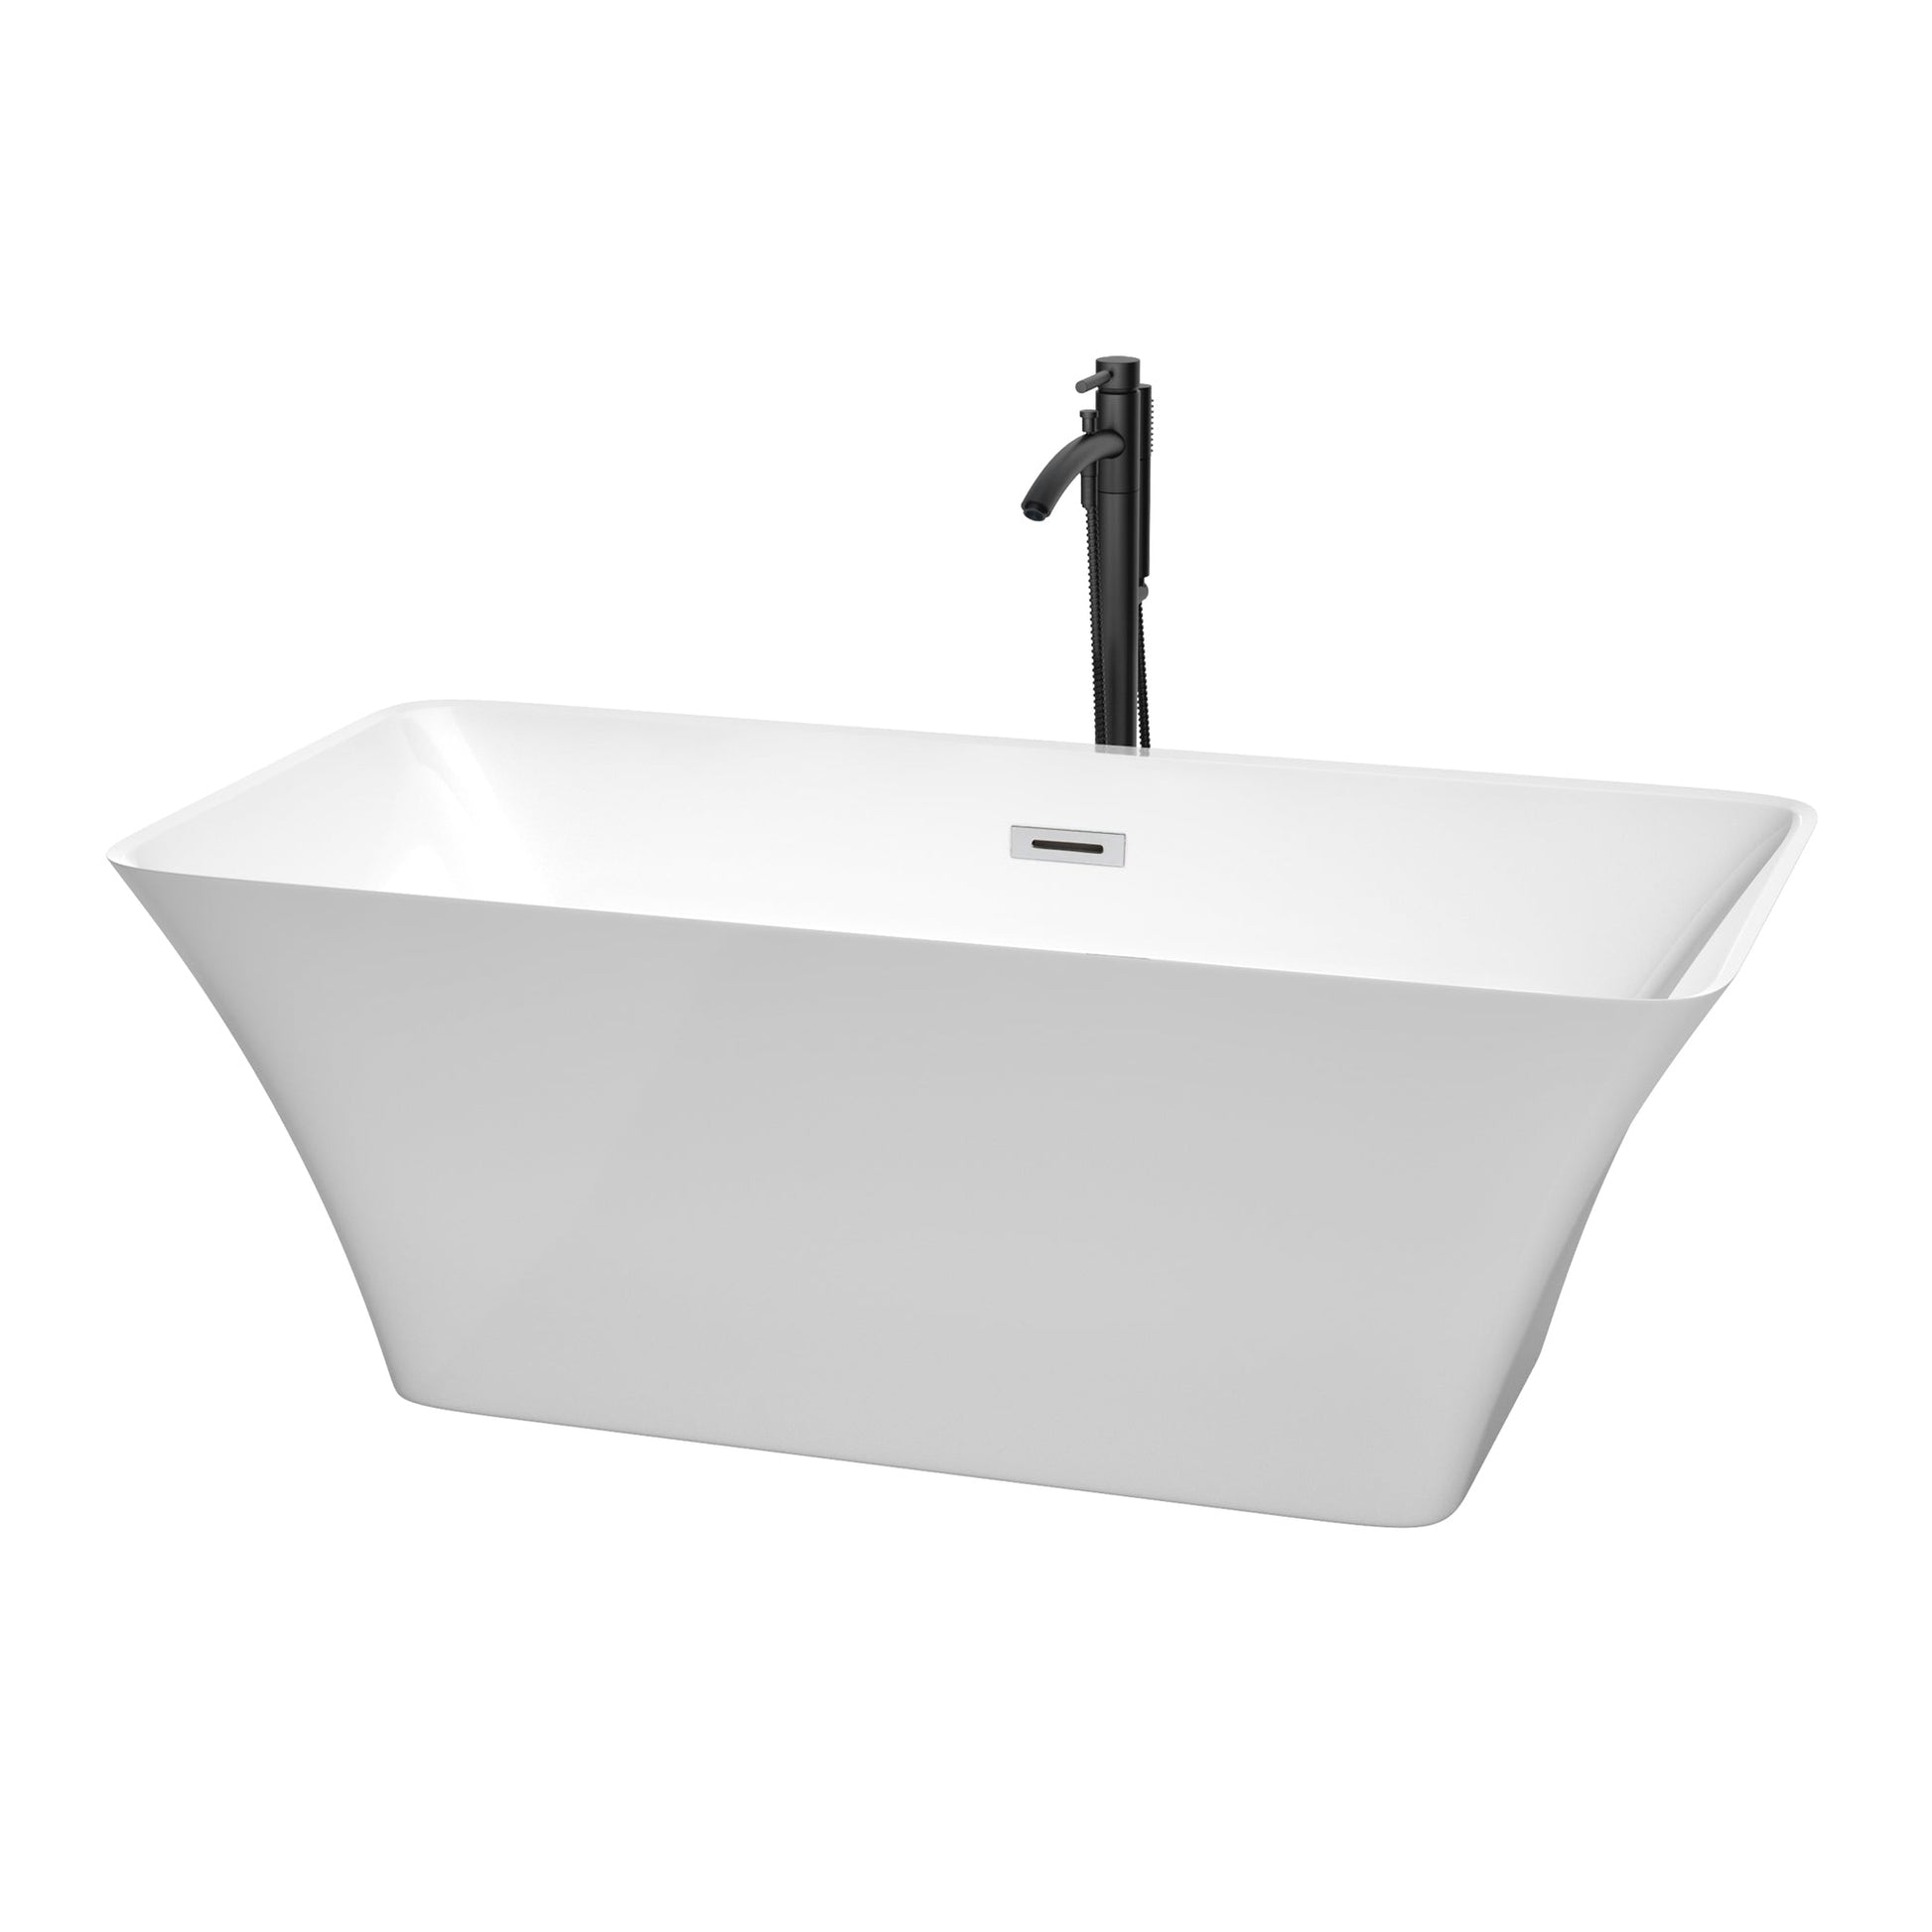 Wyndham Collection Tiffany 59" Freestanding Bathtub in White With Polished Chrome Trim and Floor Mounted Faucet in Matte Black